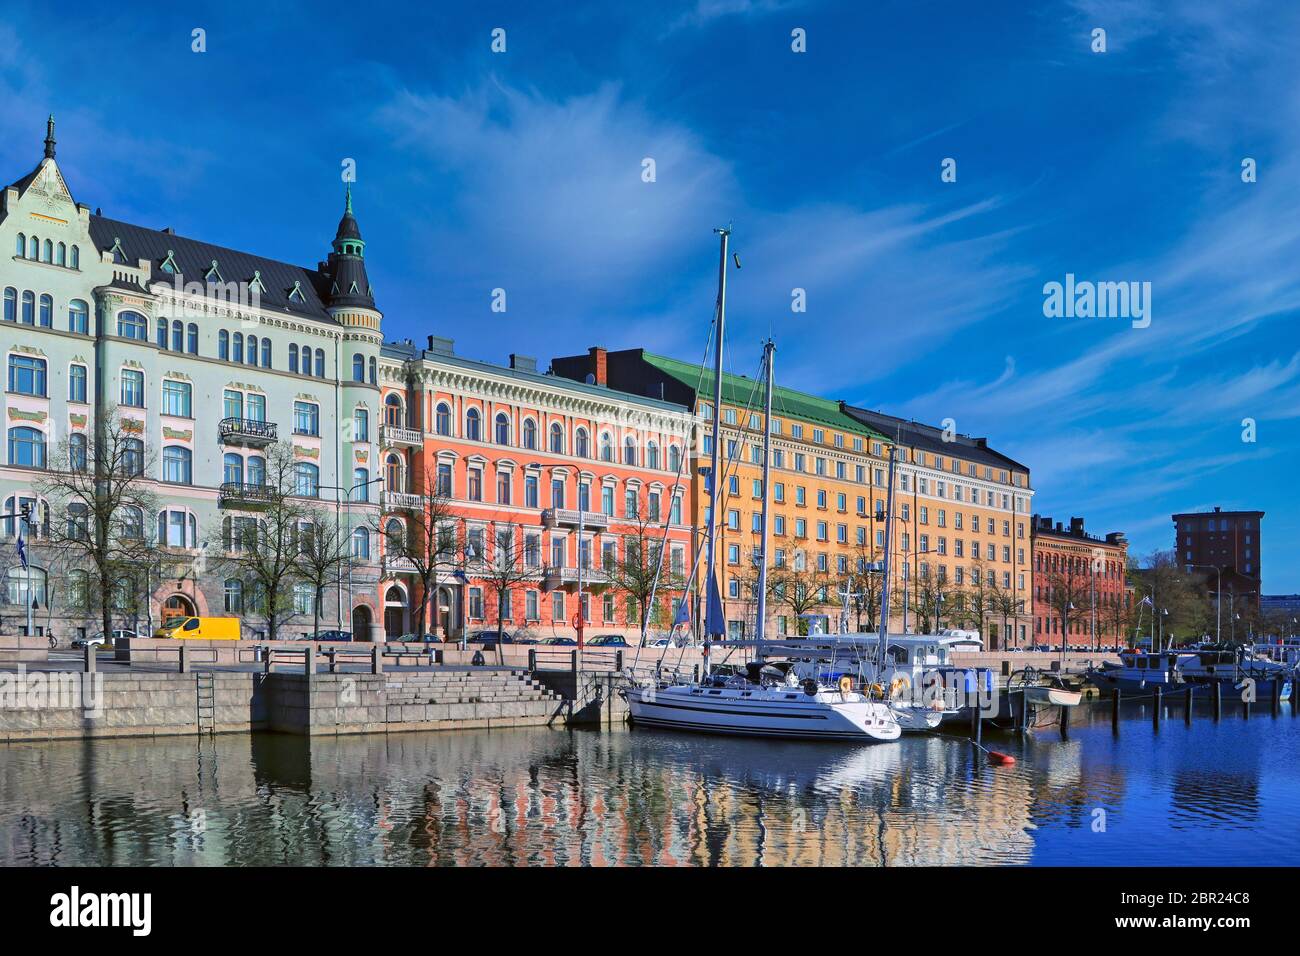 Pohjoisranta embankment with buildings of art nouveau and other historic architectural styles, and with moored recreational boats. Helsinki, Finland. Stock Photo